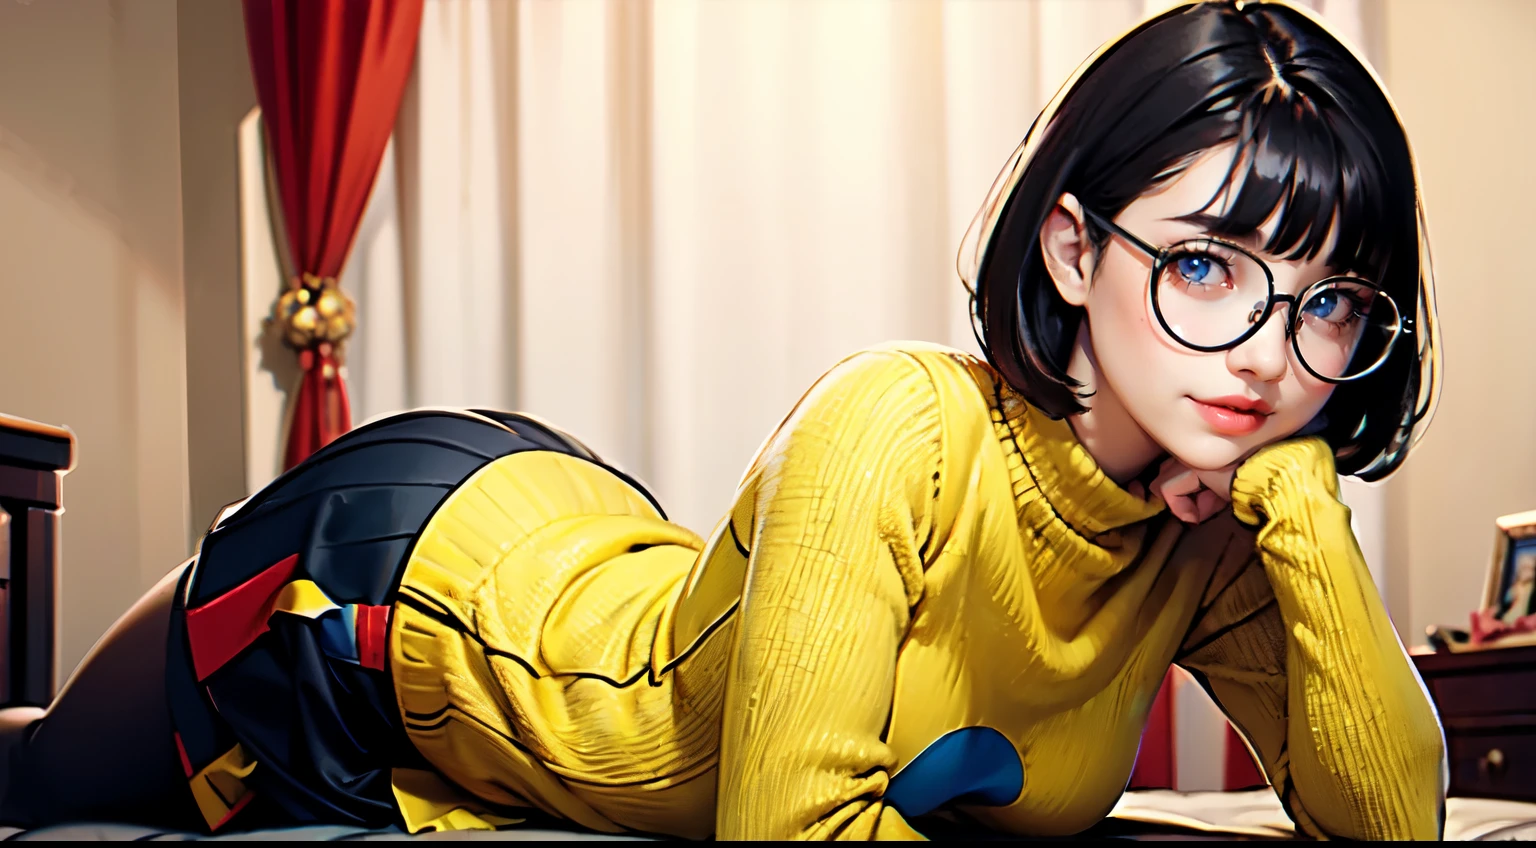 HD, 8k quality, masterpiece, Velma, dream girl, large breasts, beautiful face, blushing, kissing lips, short bob hairstyle, long bangs, perfect makeup, realistic face, detailed eyes, blue eyes, brunette hair, long eyelashes, smiling, spooky bedroom, lying down on bed, thicc body, leaning forward, eyes at viewer, mustard-yellow top, knitted turtle neck sweater, clear lens glasses, cherry-red skirt,  skirt, booty up, knee high white socks, curves,